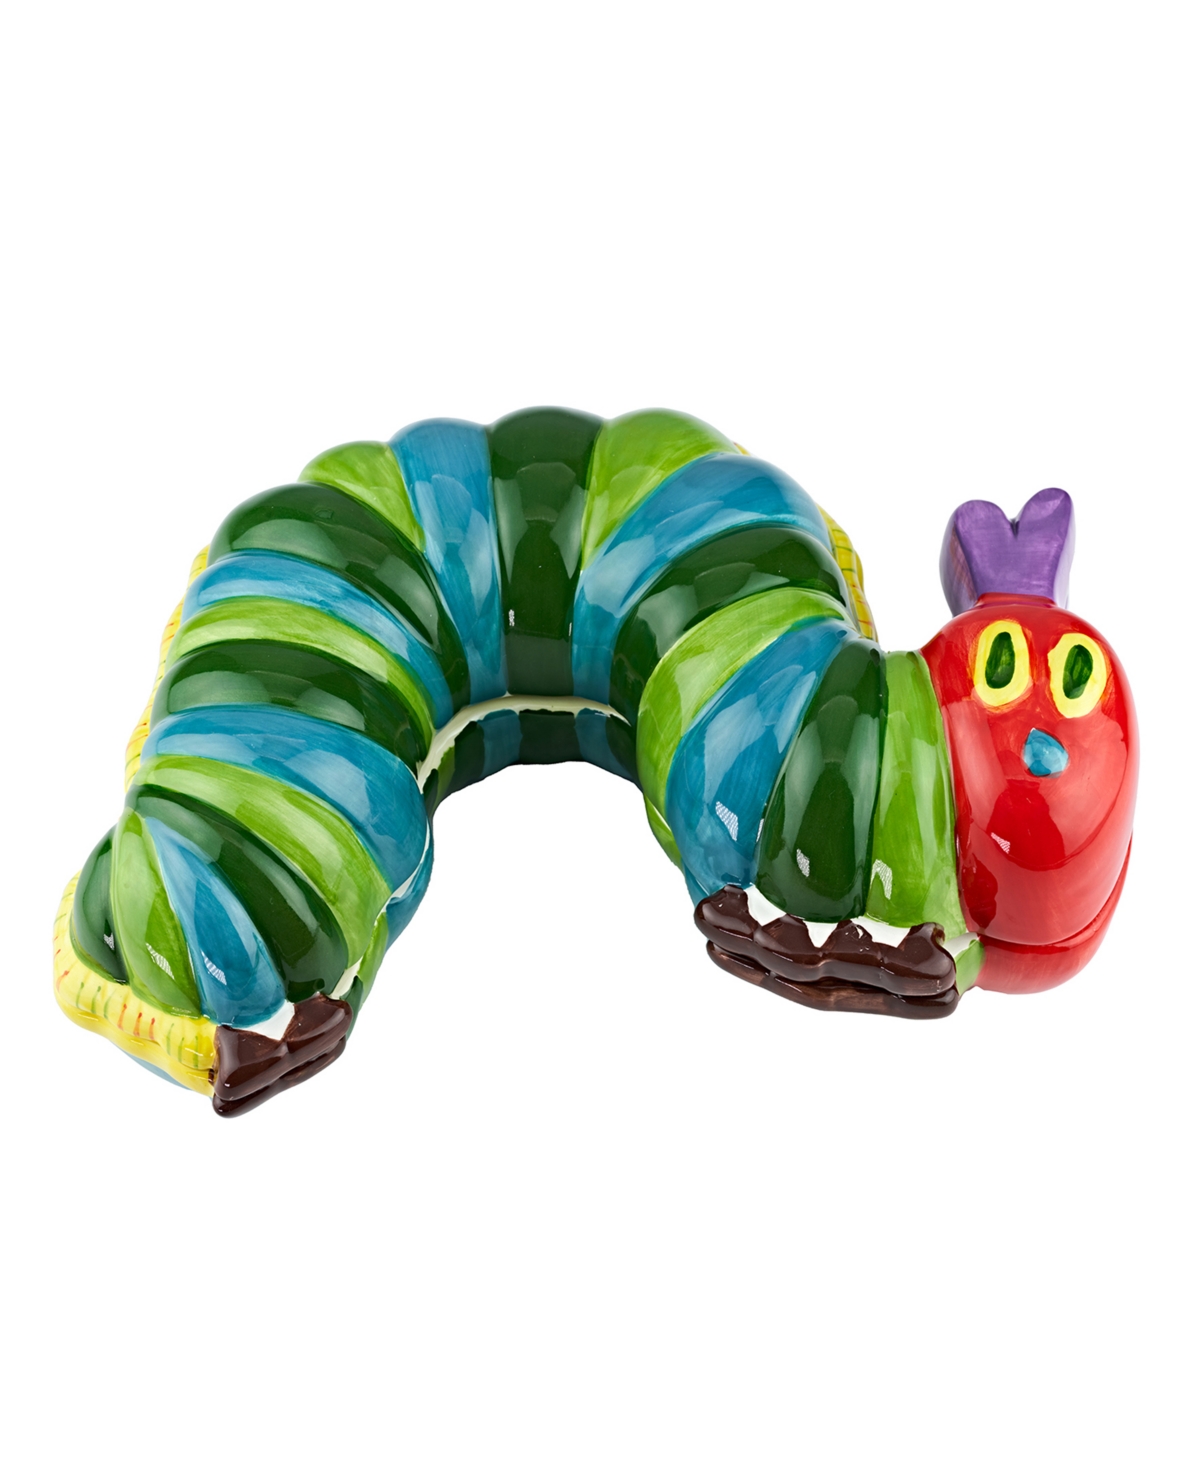 Godinger The World Of Eric Carle, The Very Hungry Caterpillar Keepsake Box In Green